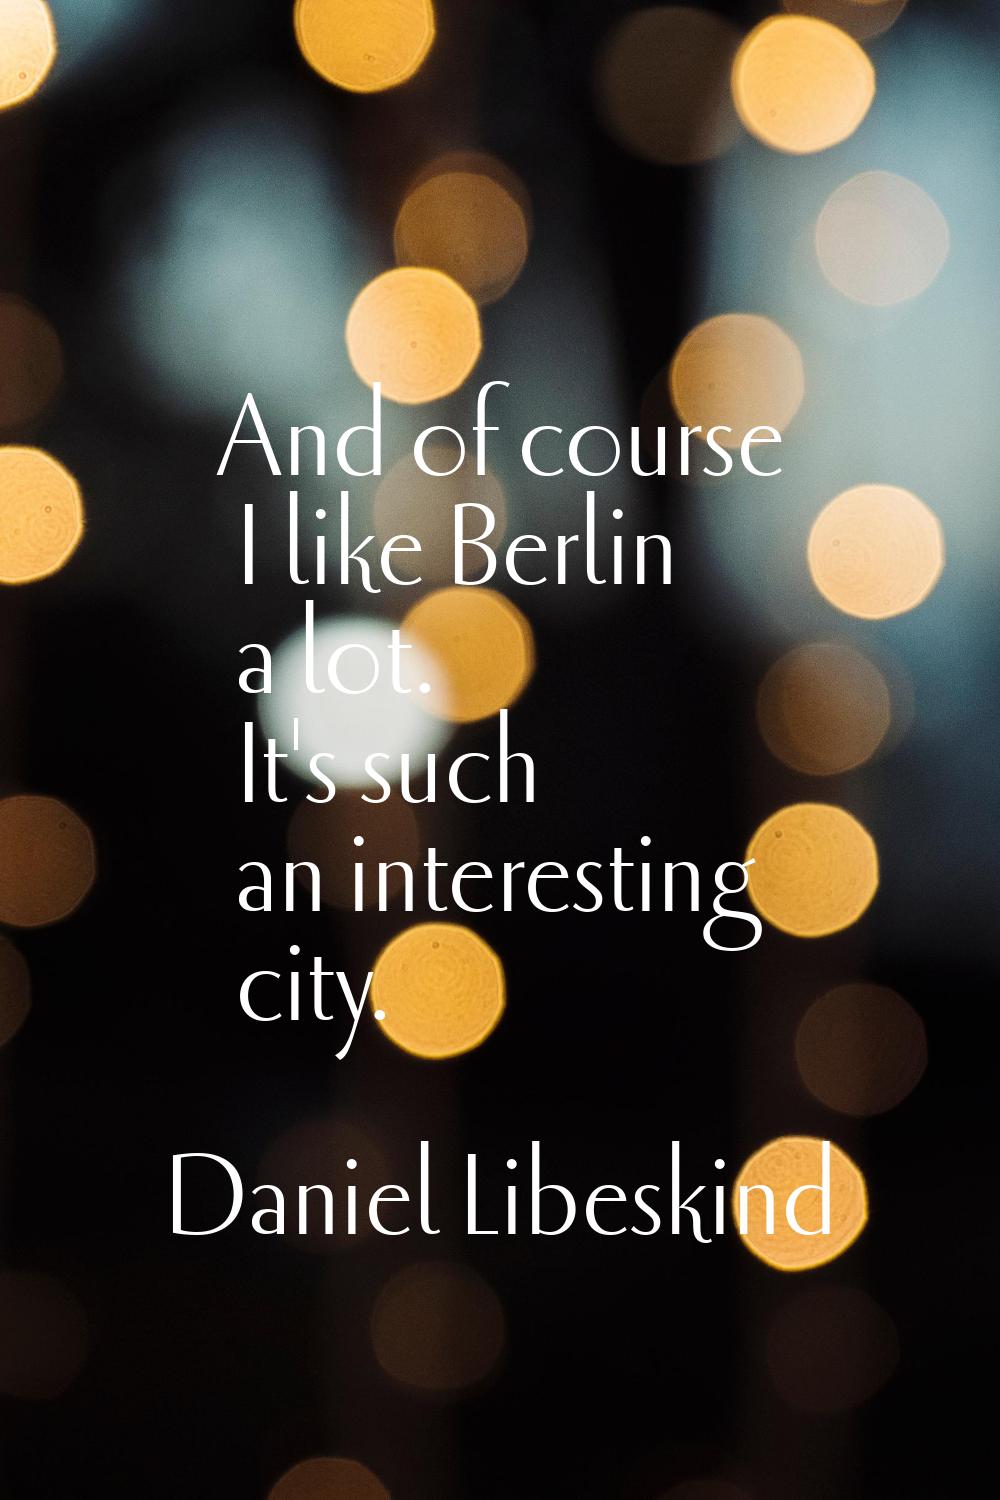 And of course I like Berlin a lot. It's such an interesting city.